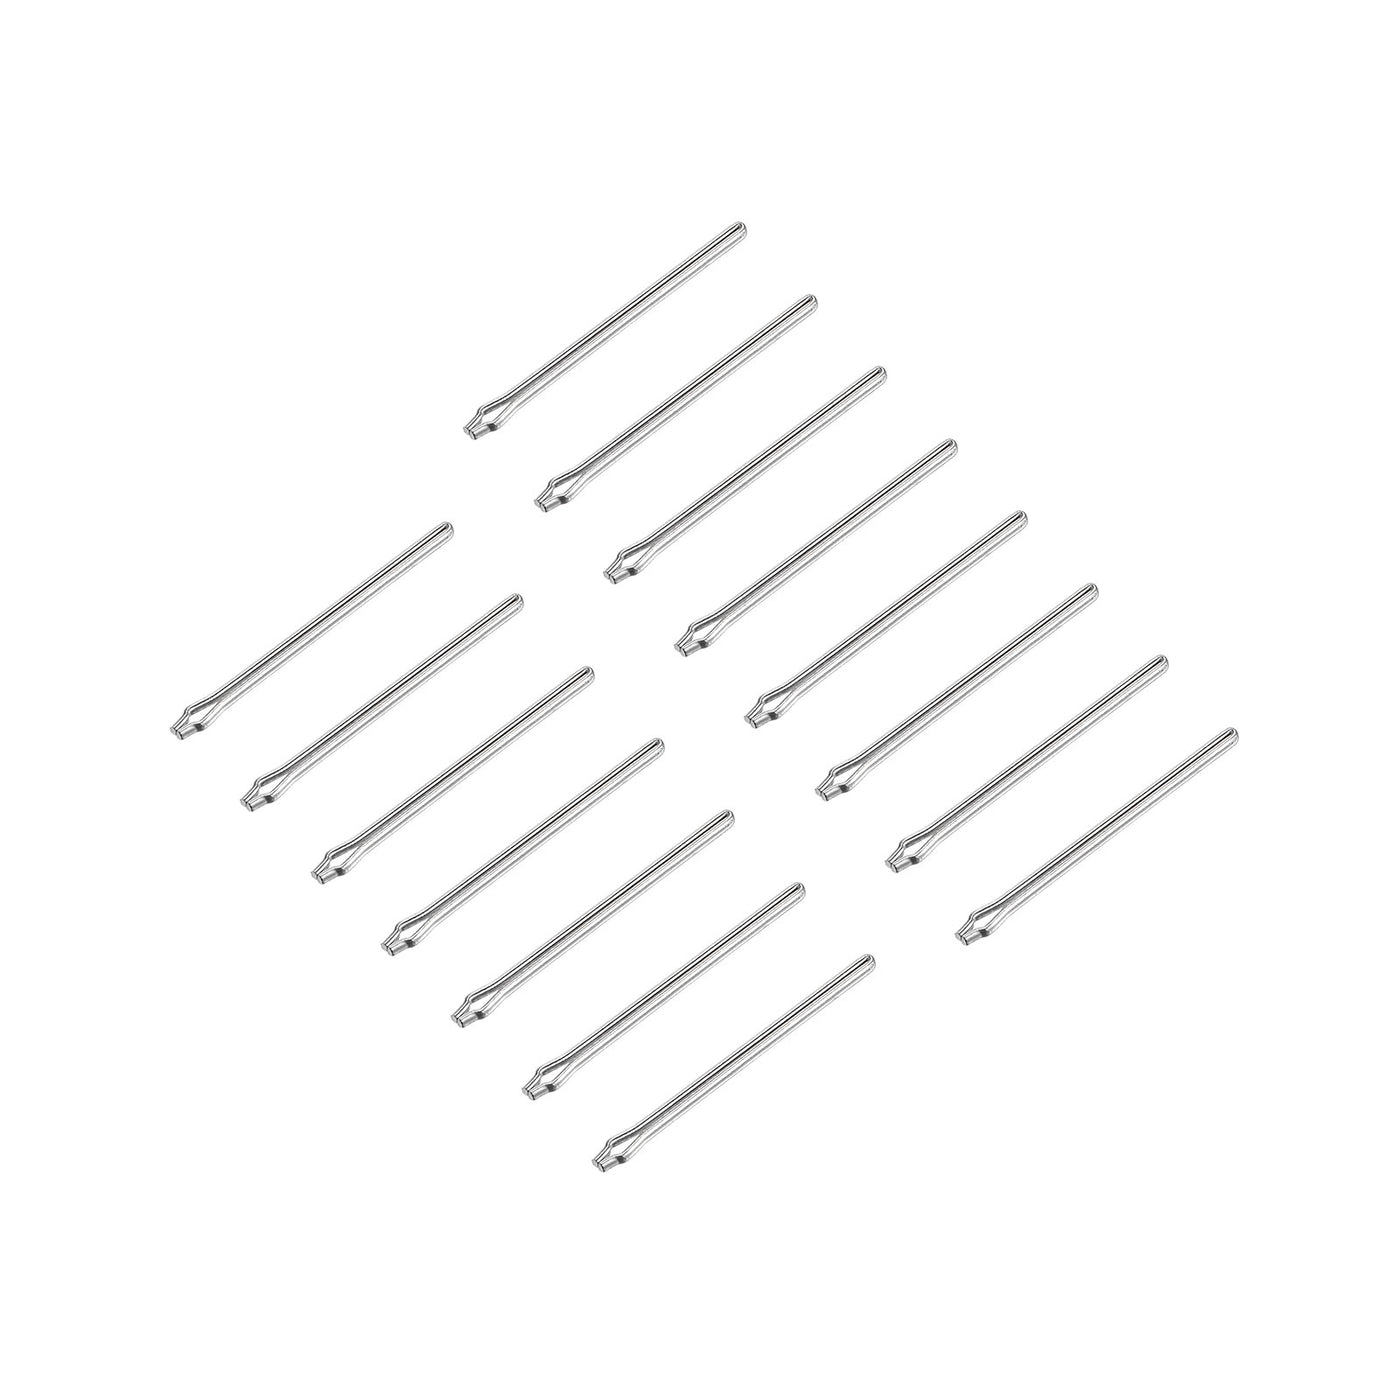 Uxcell Uxcell 15Pcs 19mm Watch Band Link Cotter Pin, Stainless Steel 1mm Dia. Silver Tone